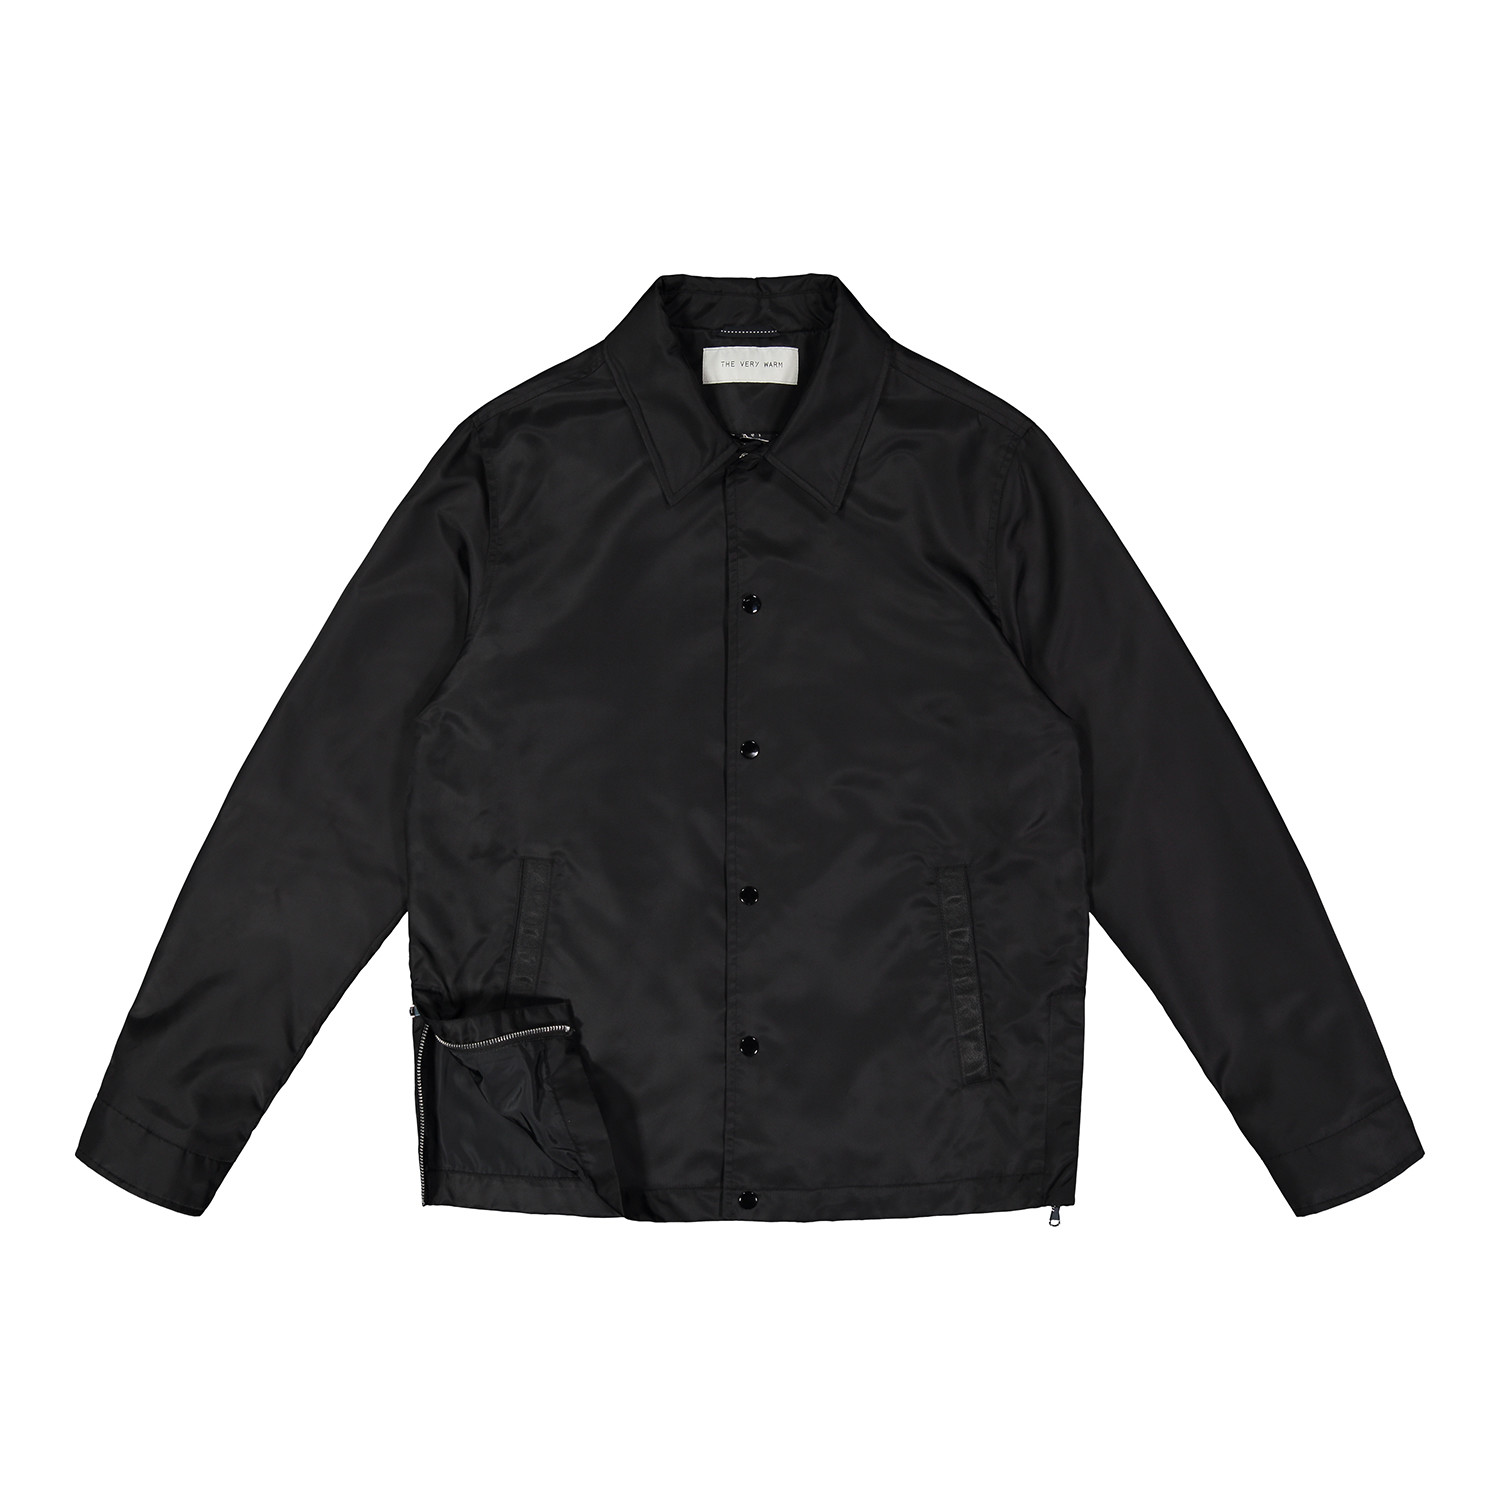 Coach's Jacket // Black (S) - VRY WRM - Touch of Modern